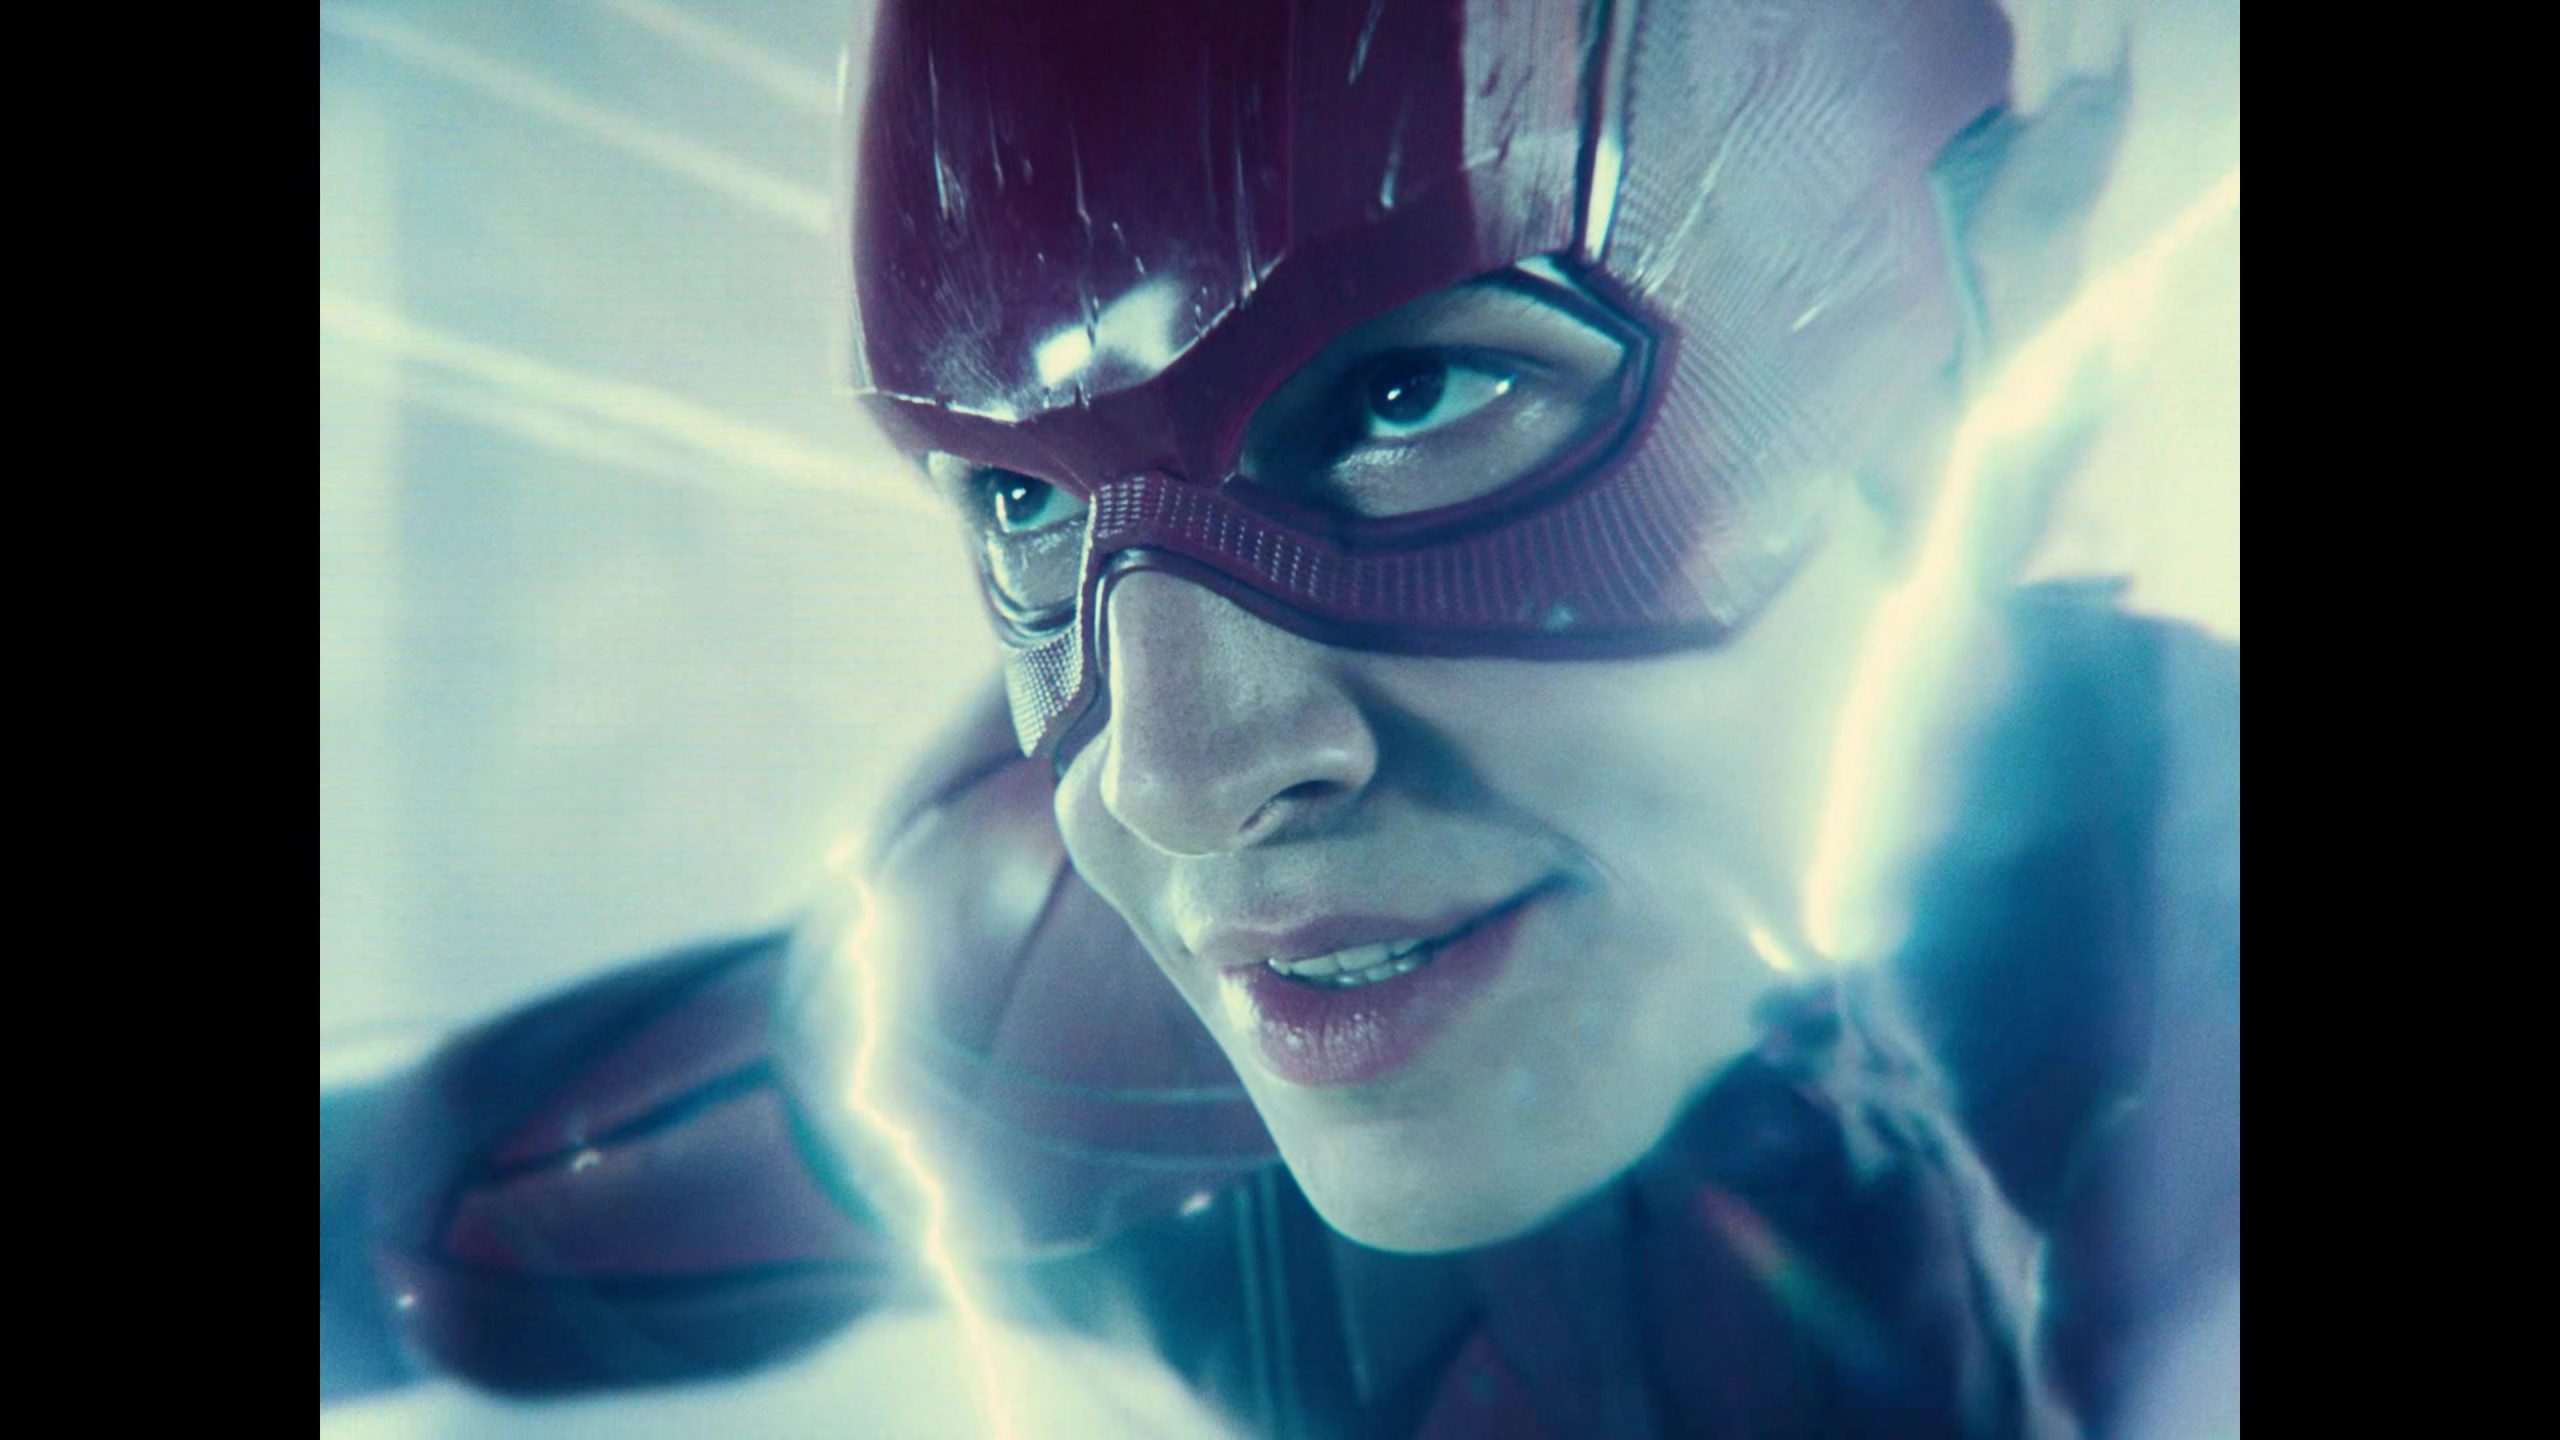 The Flash (Ezra Miller) makes a last ditch attempt to save the world in Zack Snyder's Justice League (2021), Warner Bros. Entertainment